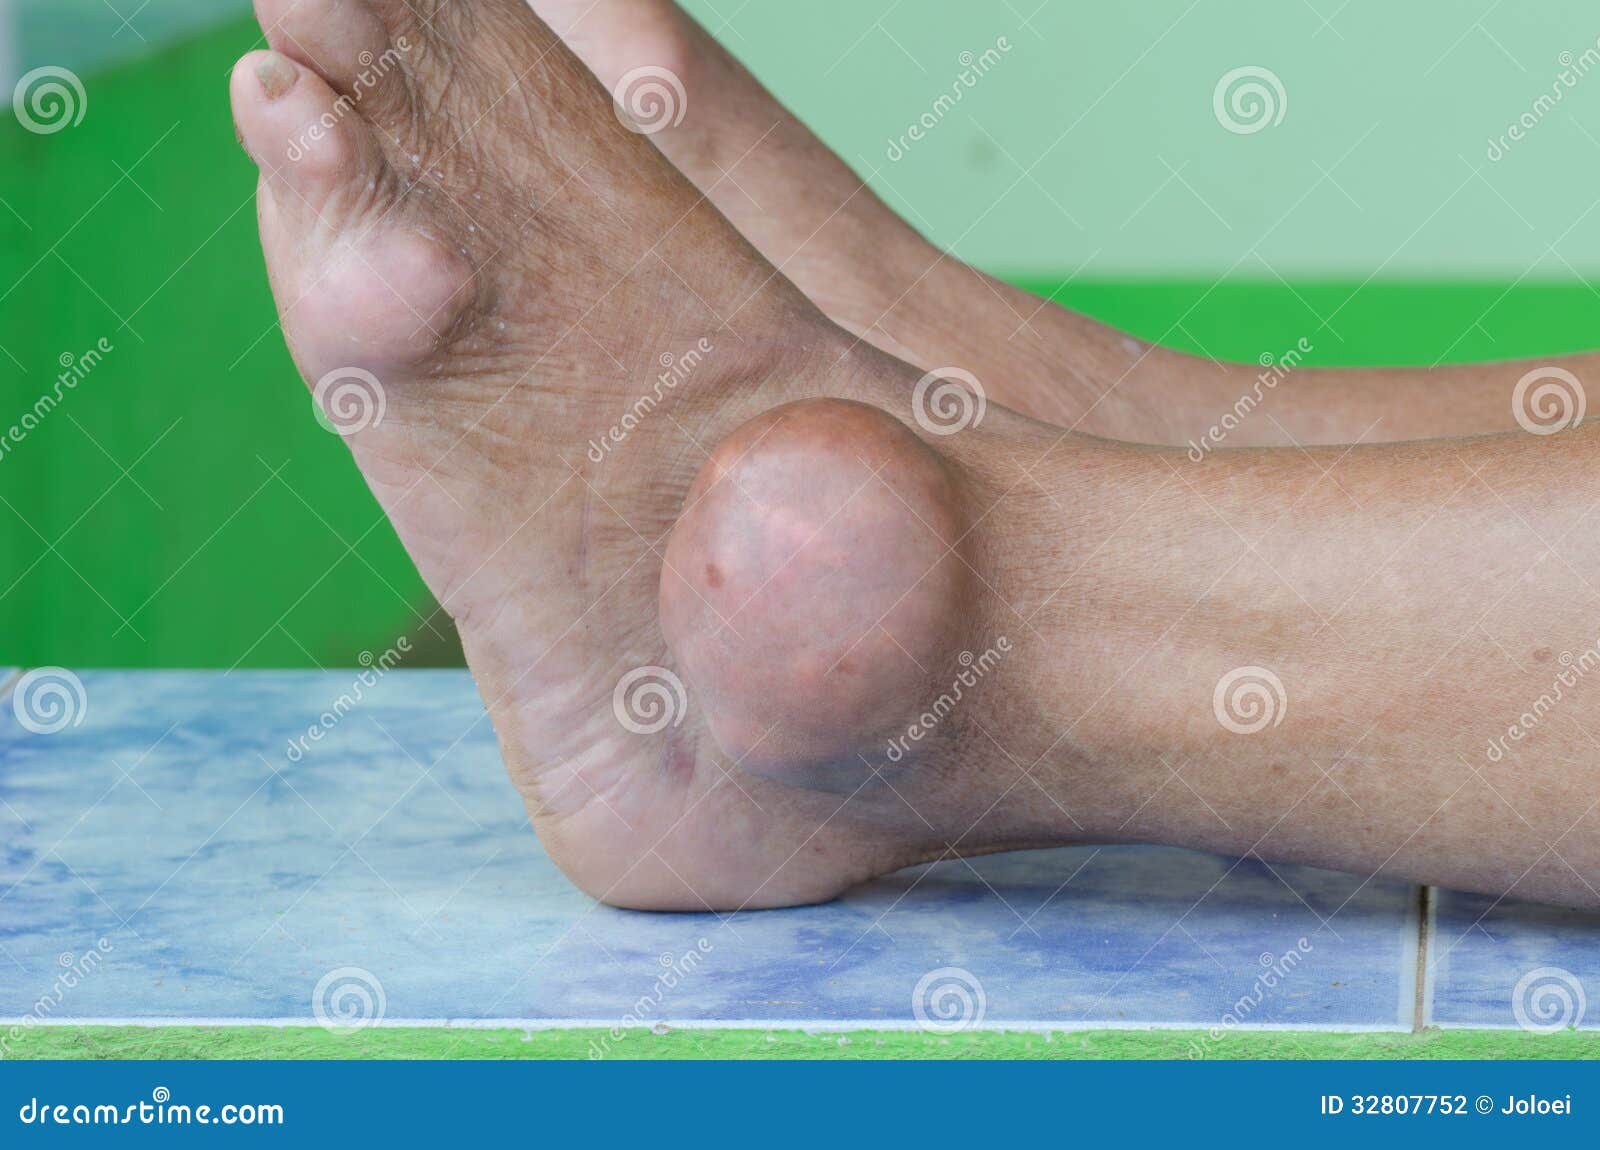 gout foot pictures